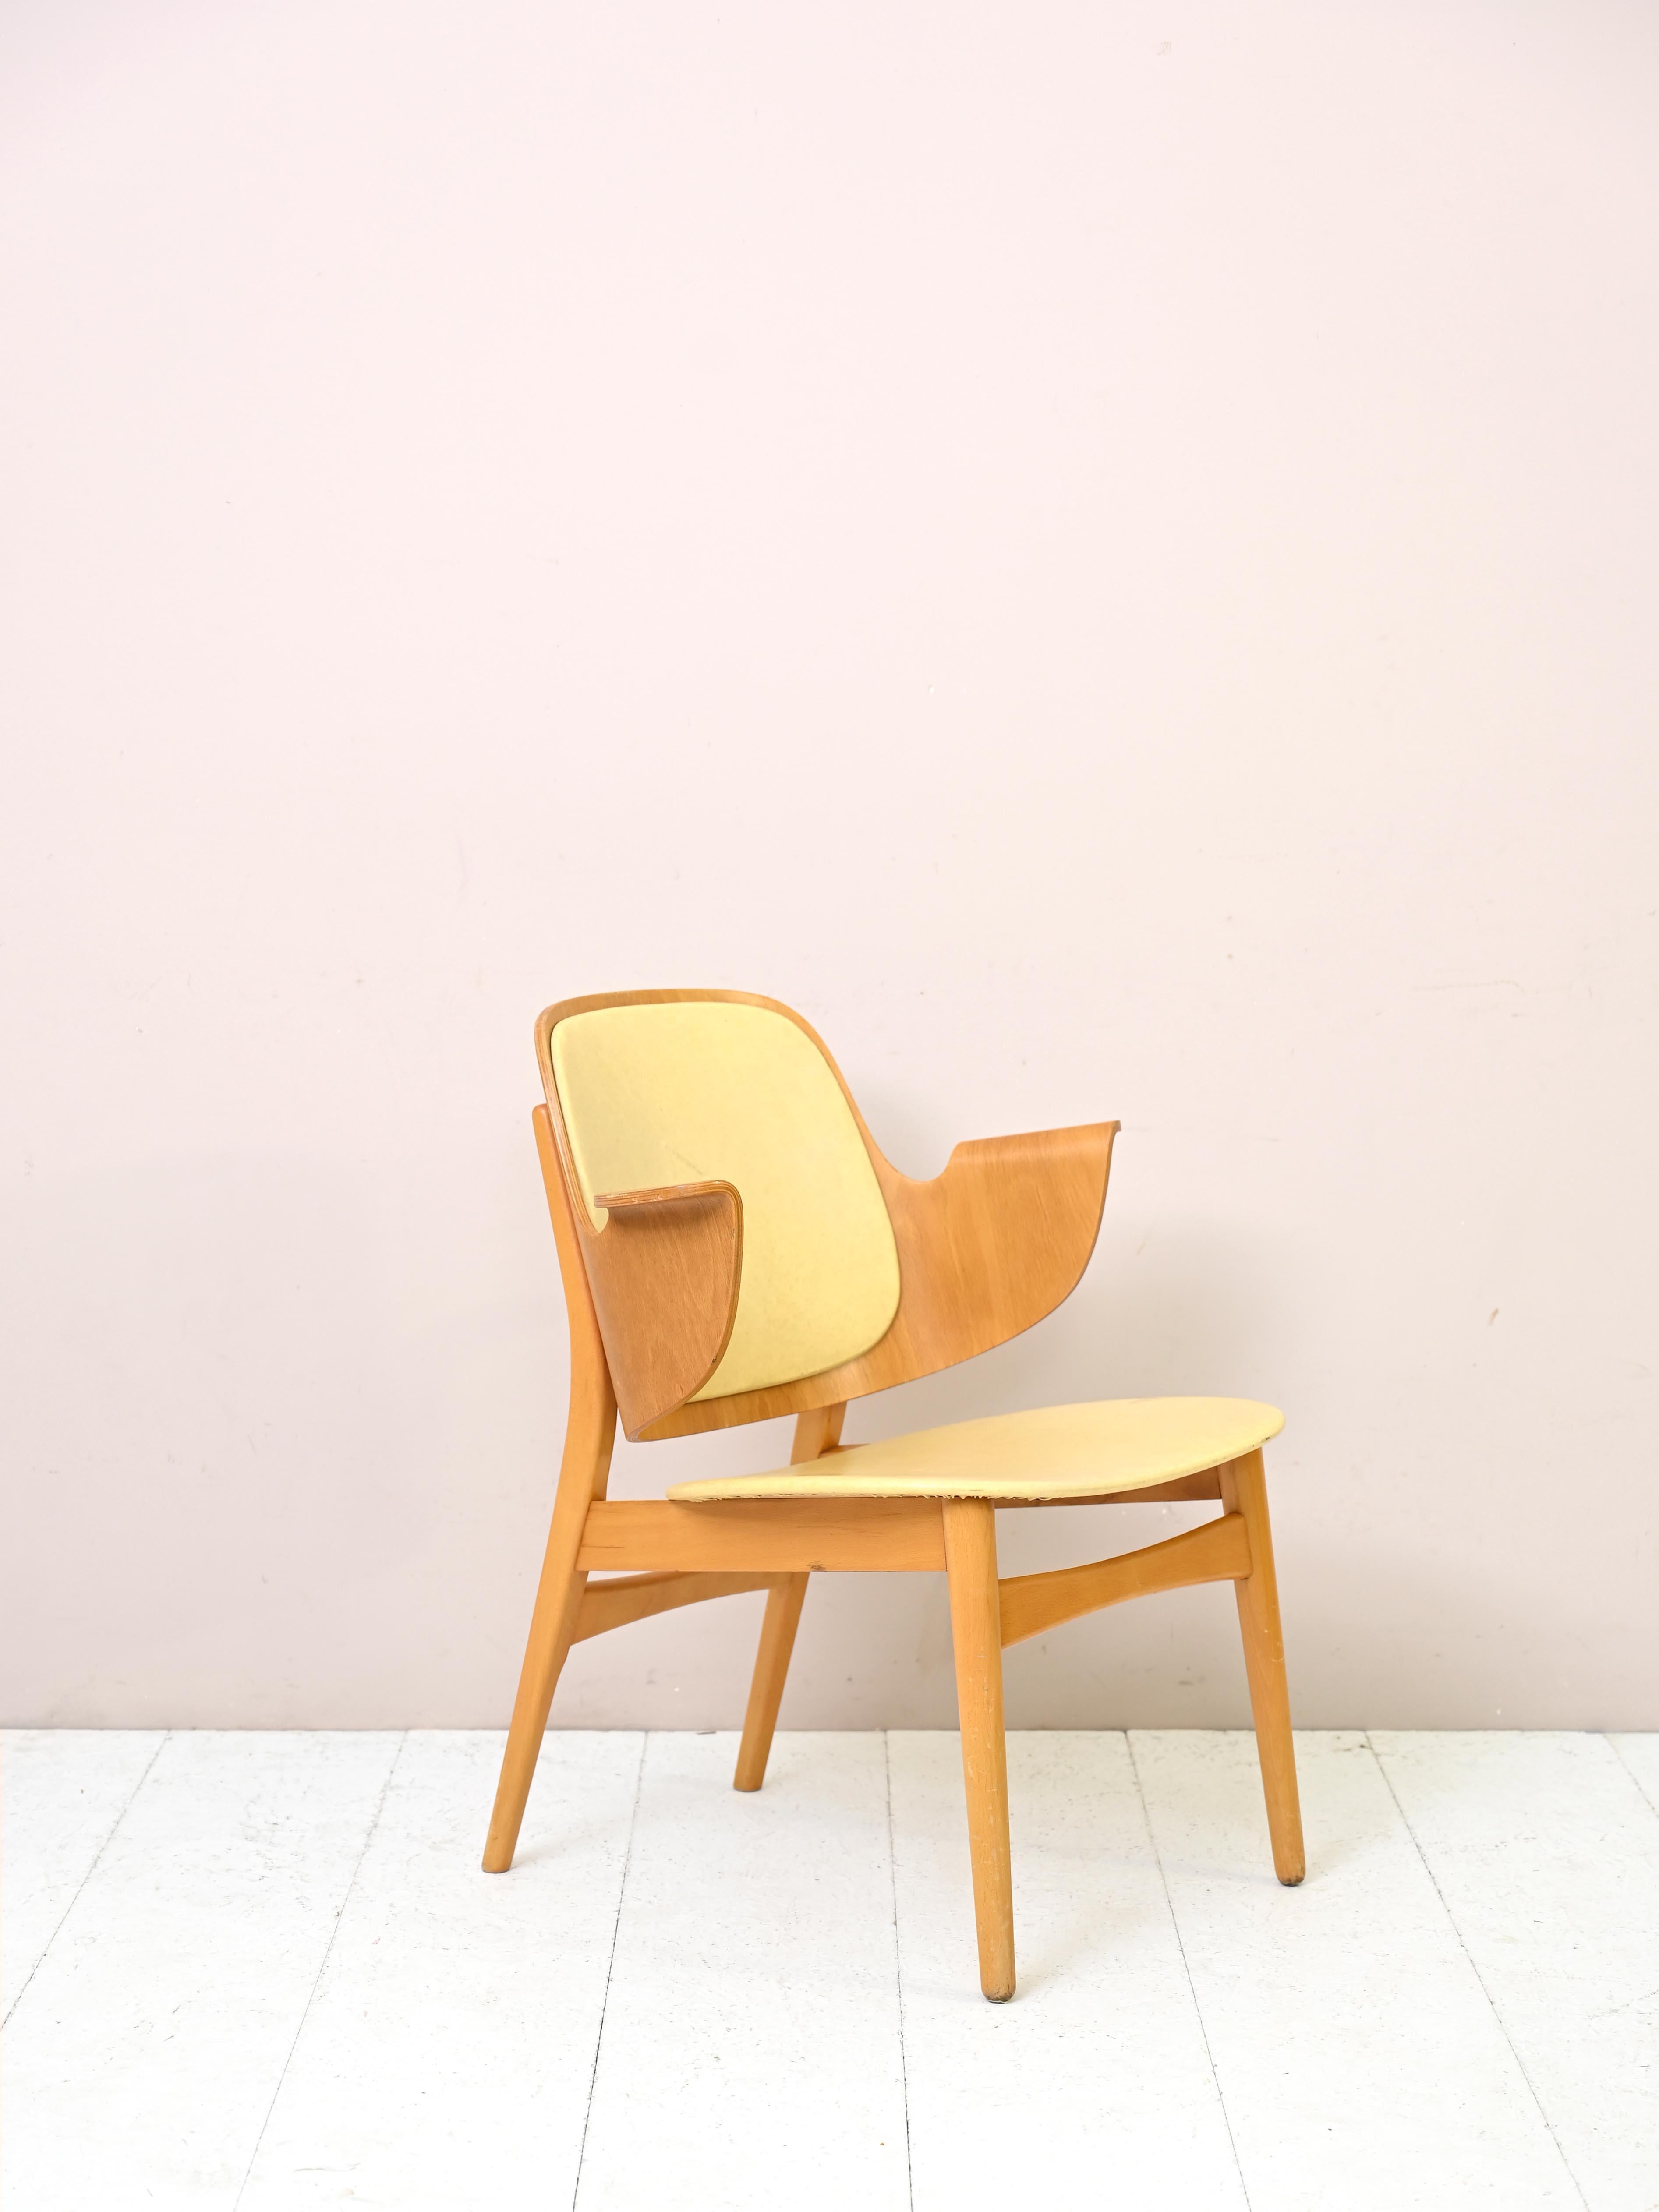 Vintage model 107 armchair designed by Danish designer Hans Olsen.
A classic Danish design: the backrest and arms are on a single piece of shaped laminated wood.
The seat and back are upholstered in yellow leatherette.

Pair of model 107 shell